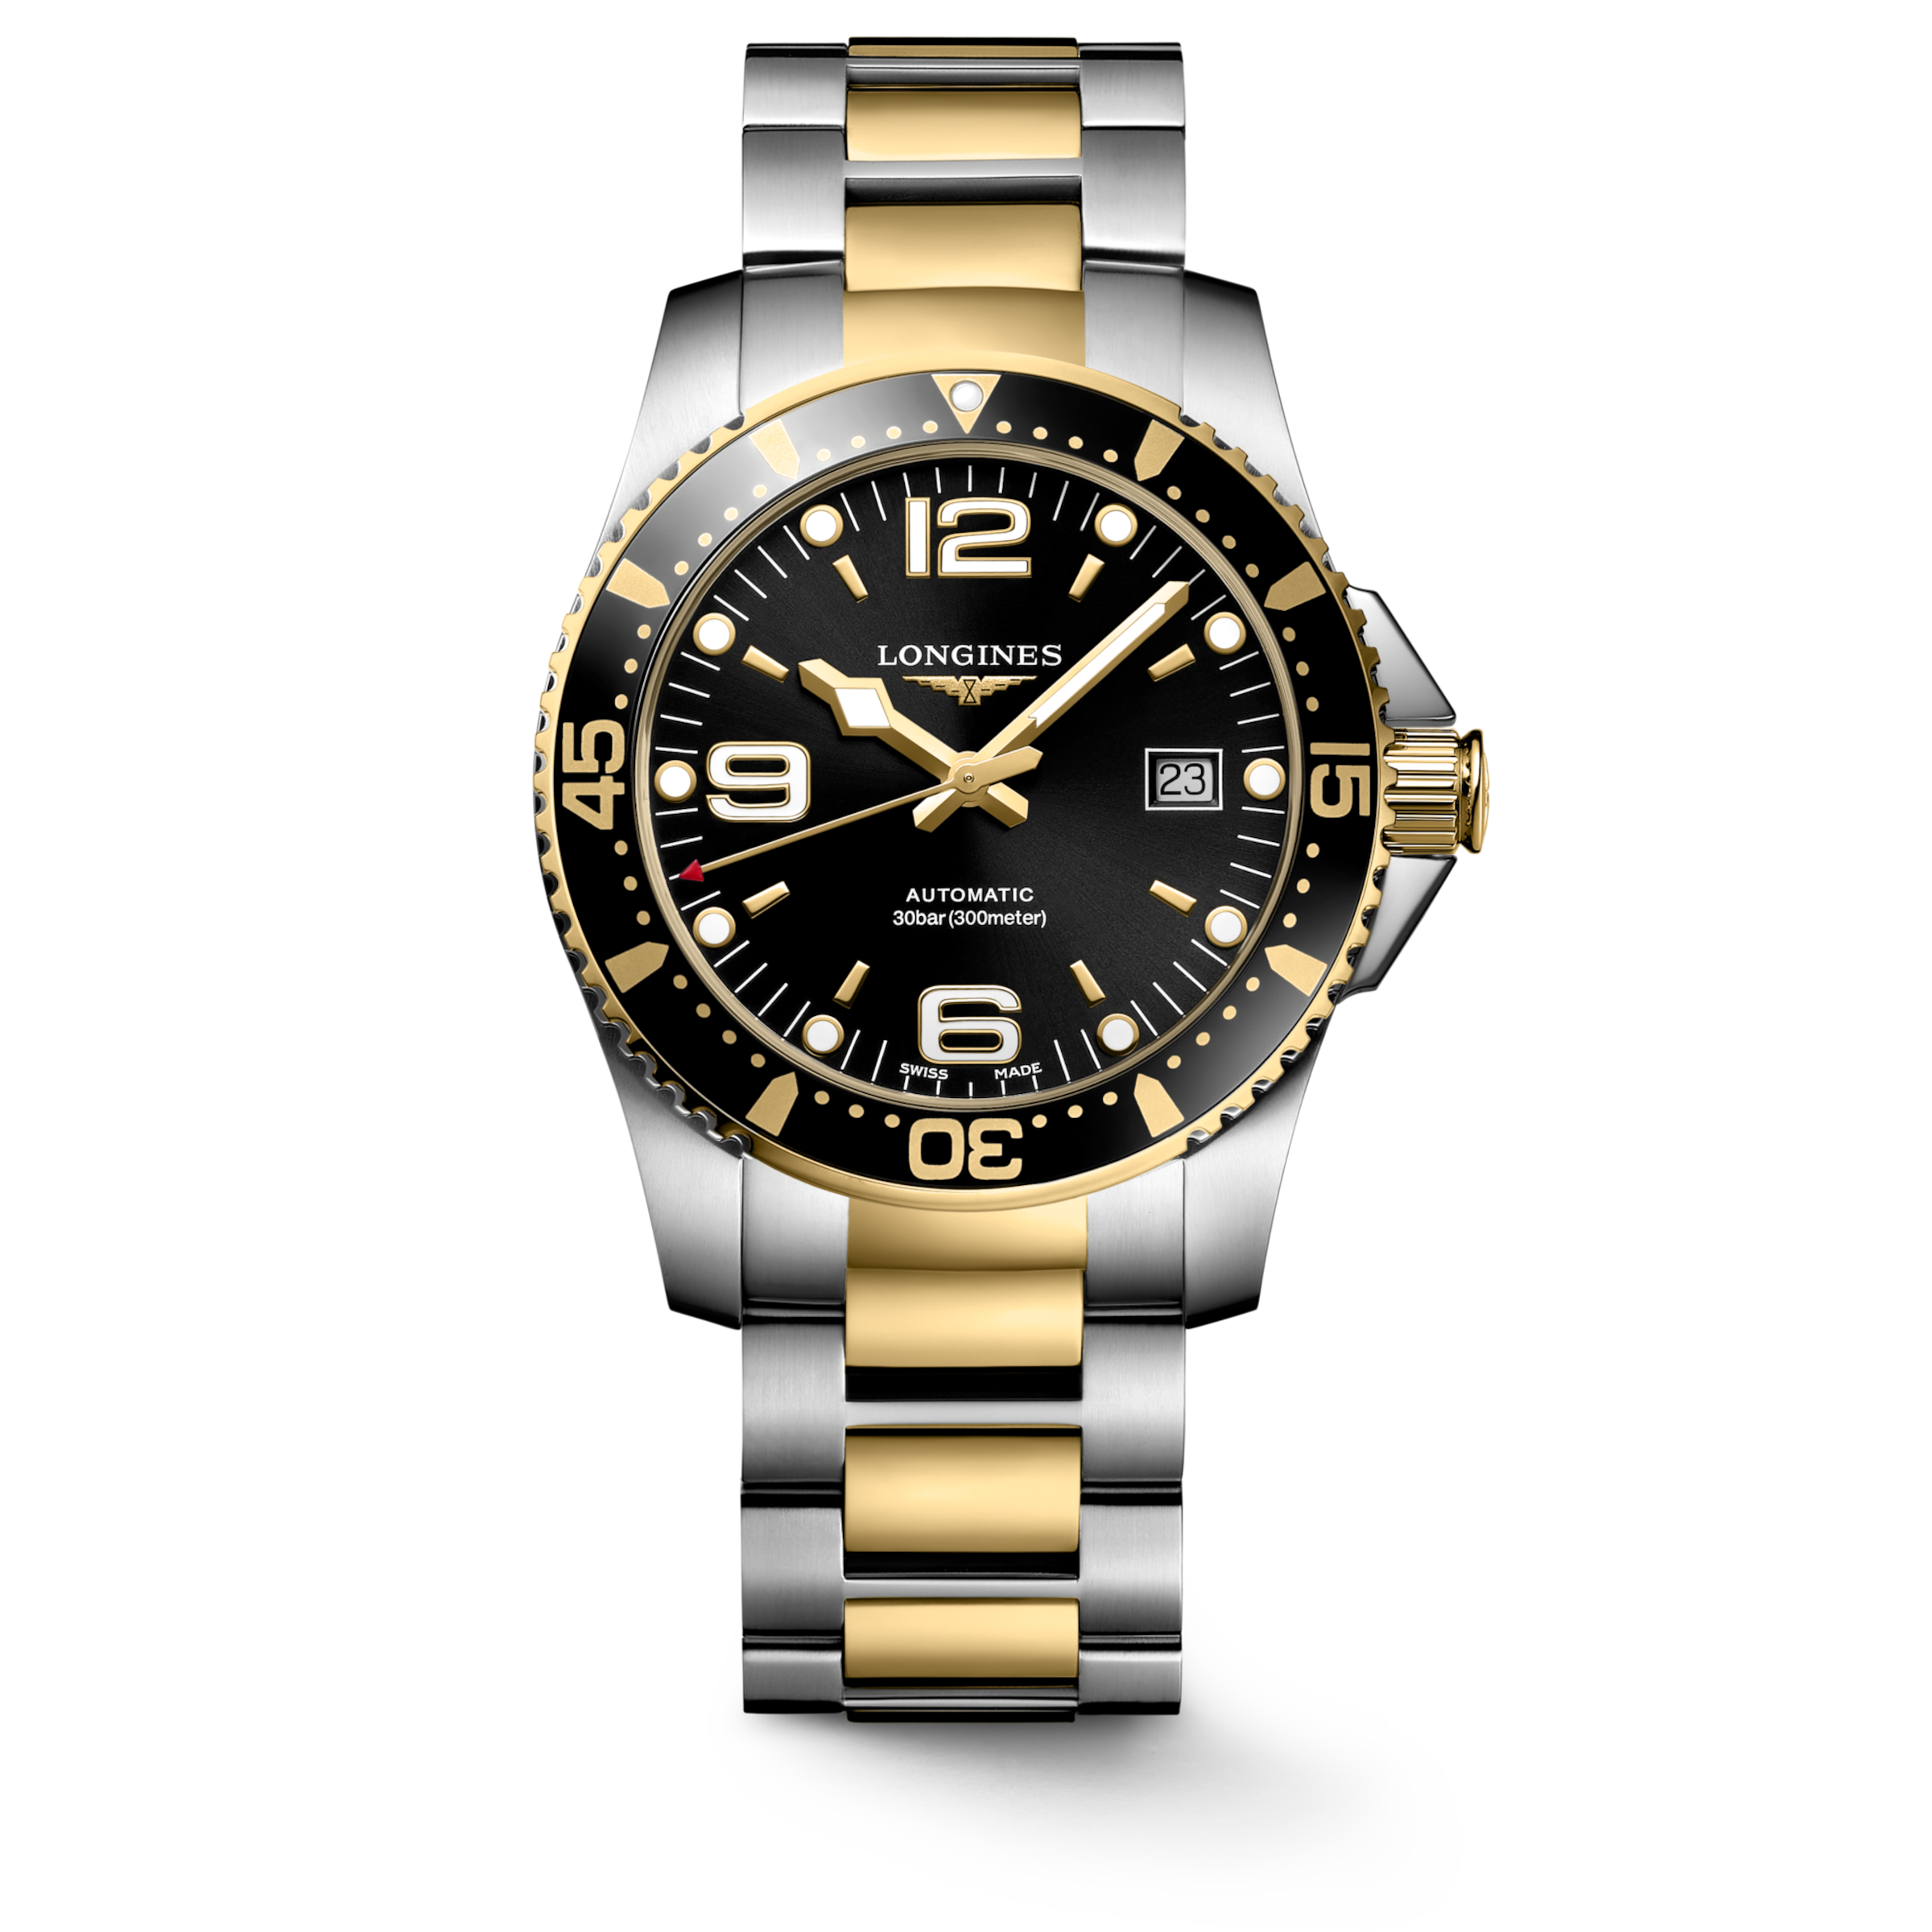 Longines HYDROCONQUEST Automatic Stainless steel and yellow PVD coating Watch - L3.742.3.56.7